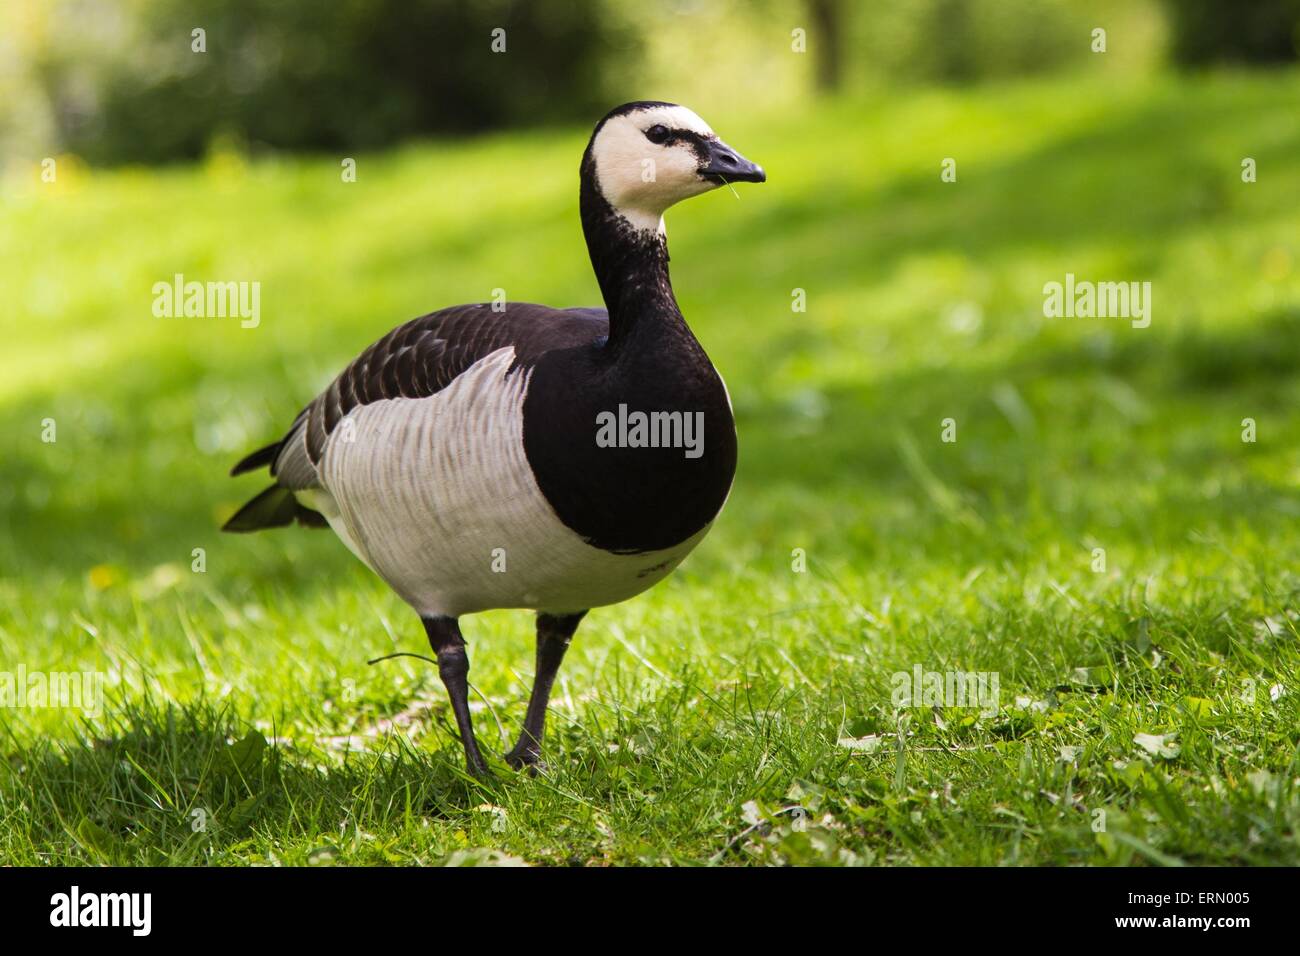 Beautiful Barnacle Goose Standing on Green Grass With Shrubbery in the Background Stock Photo